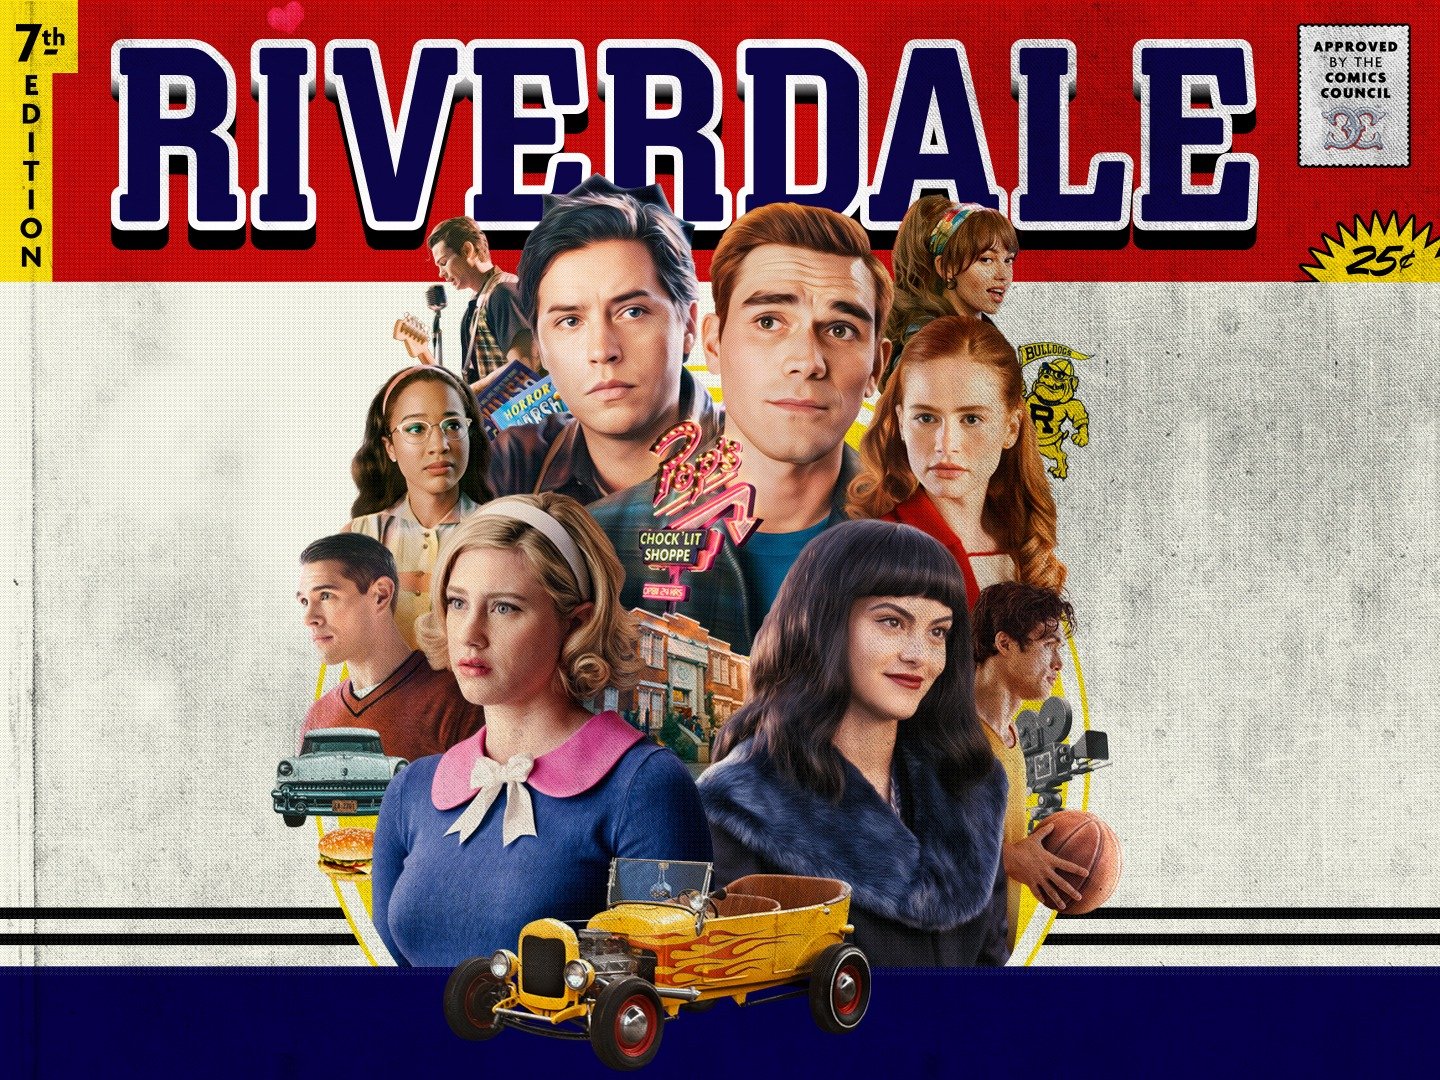 Point Classics track placed in popular American TV series Riverdale